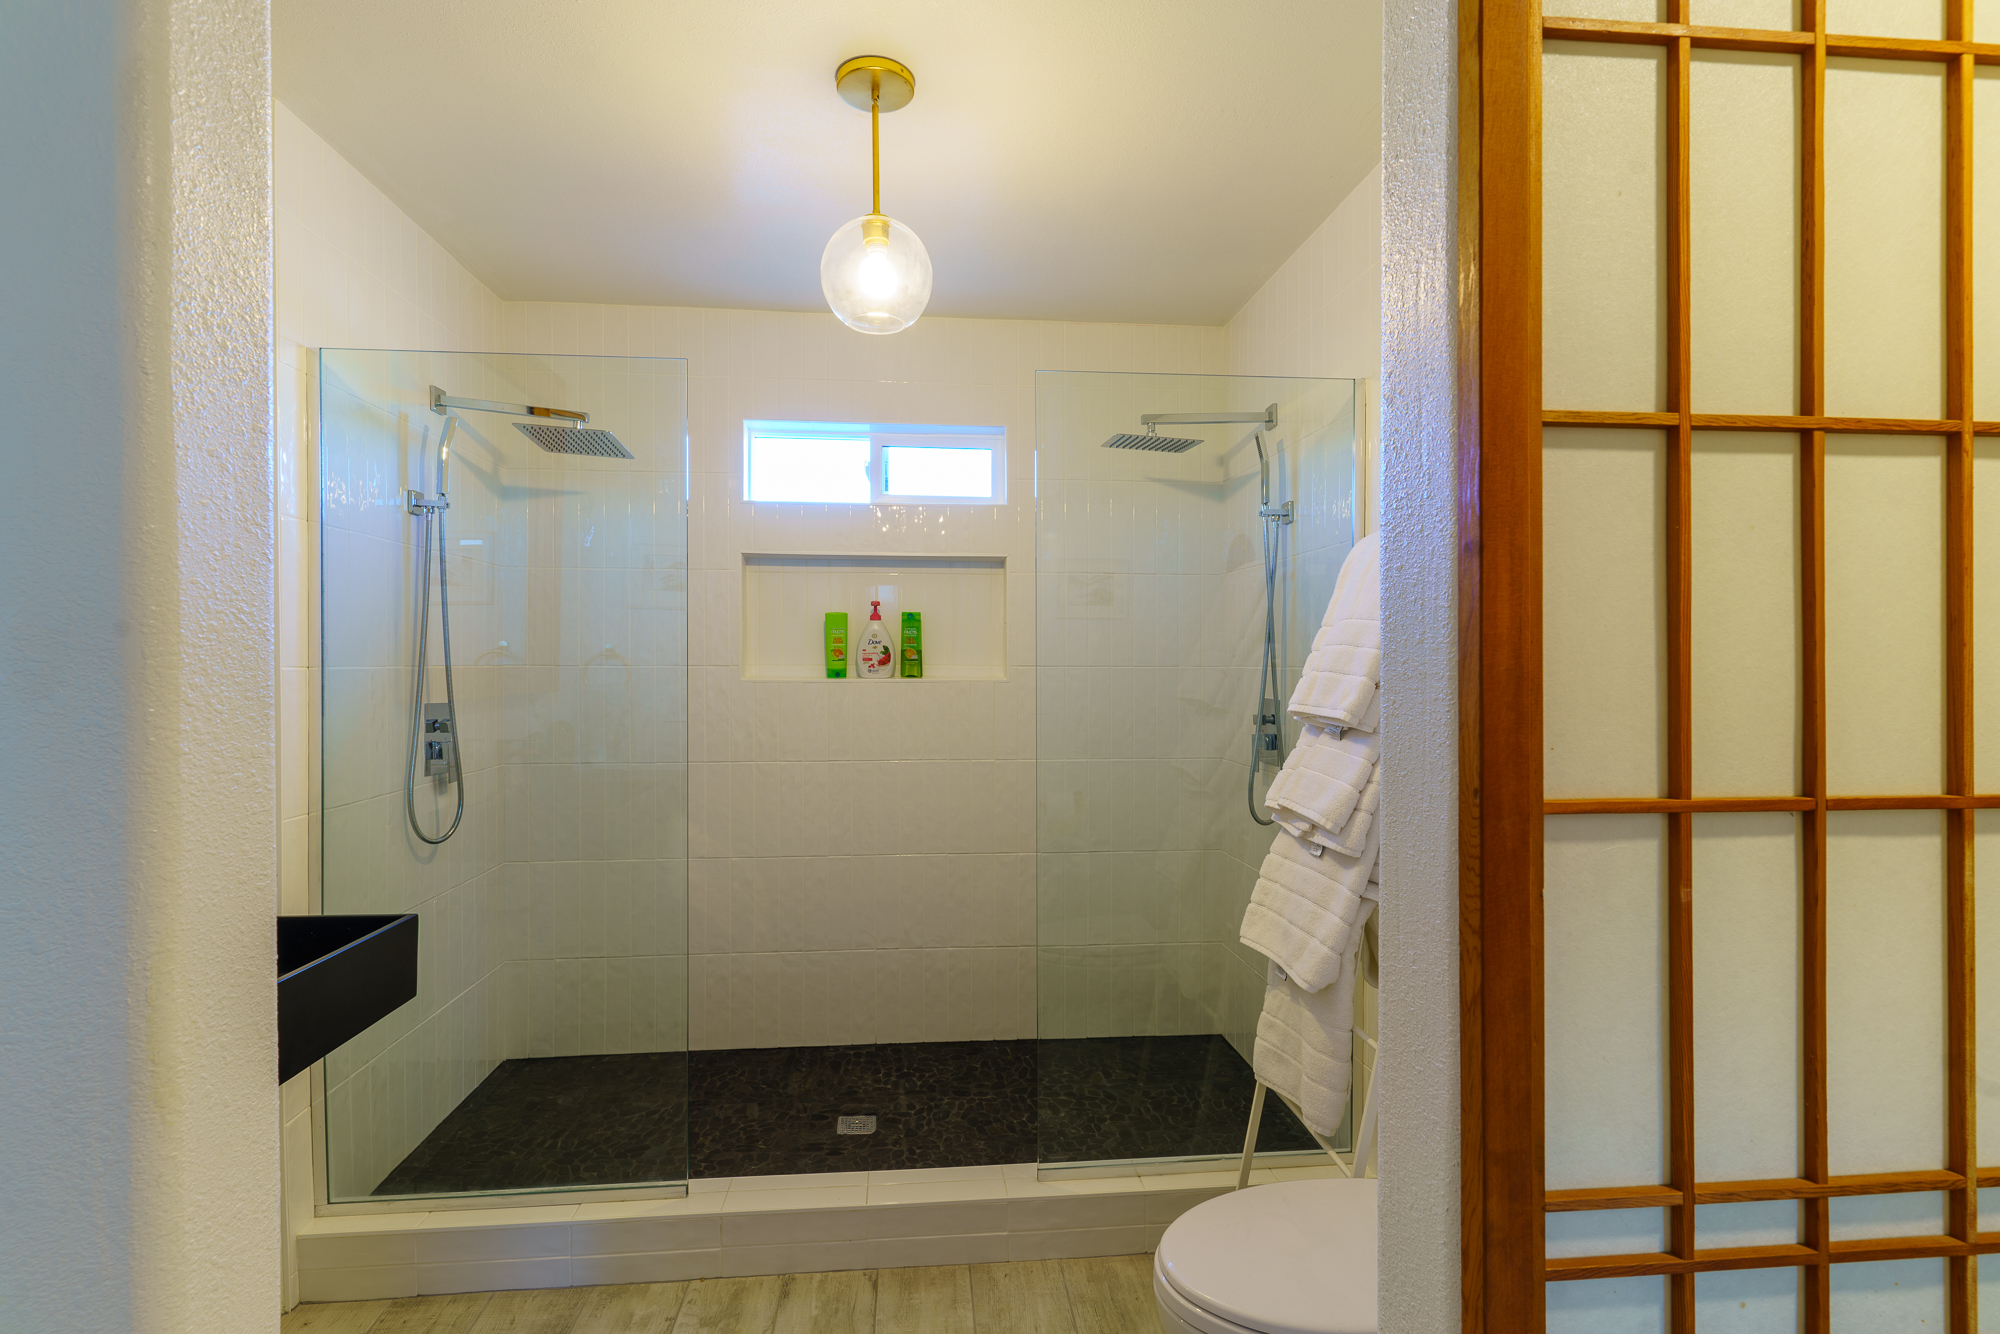 A bathroom with a toilet, sink, and glass shower with two shower heads.